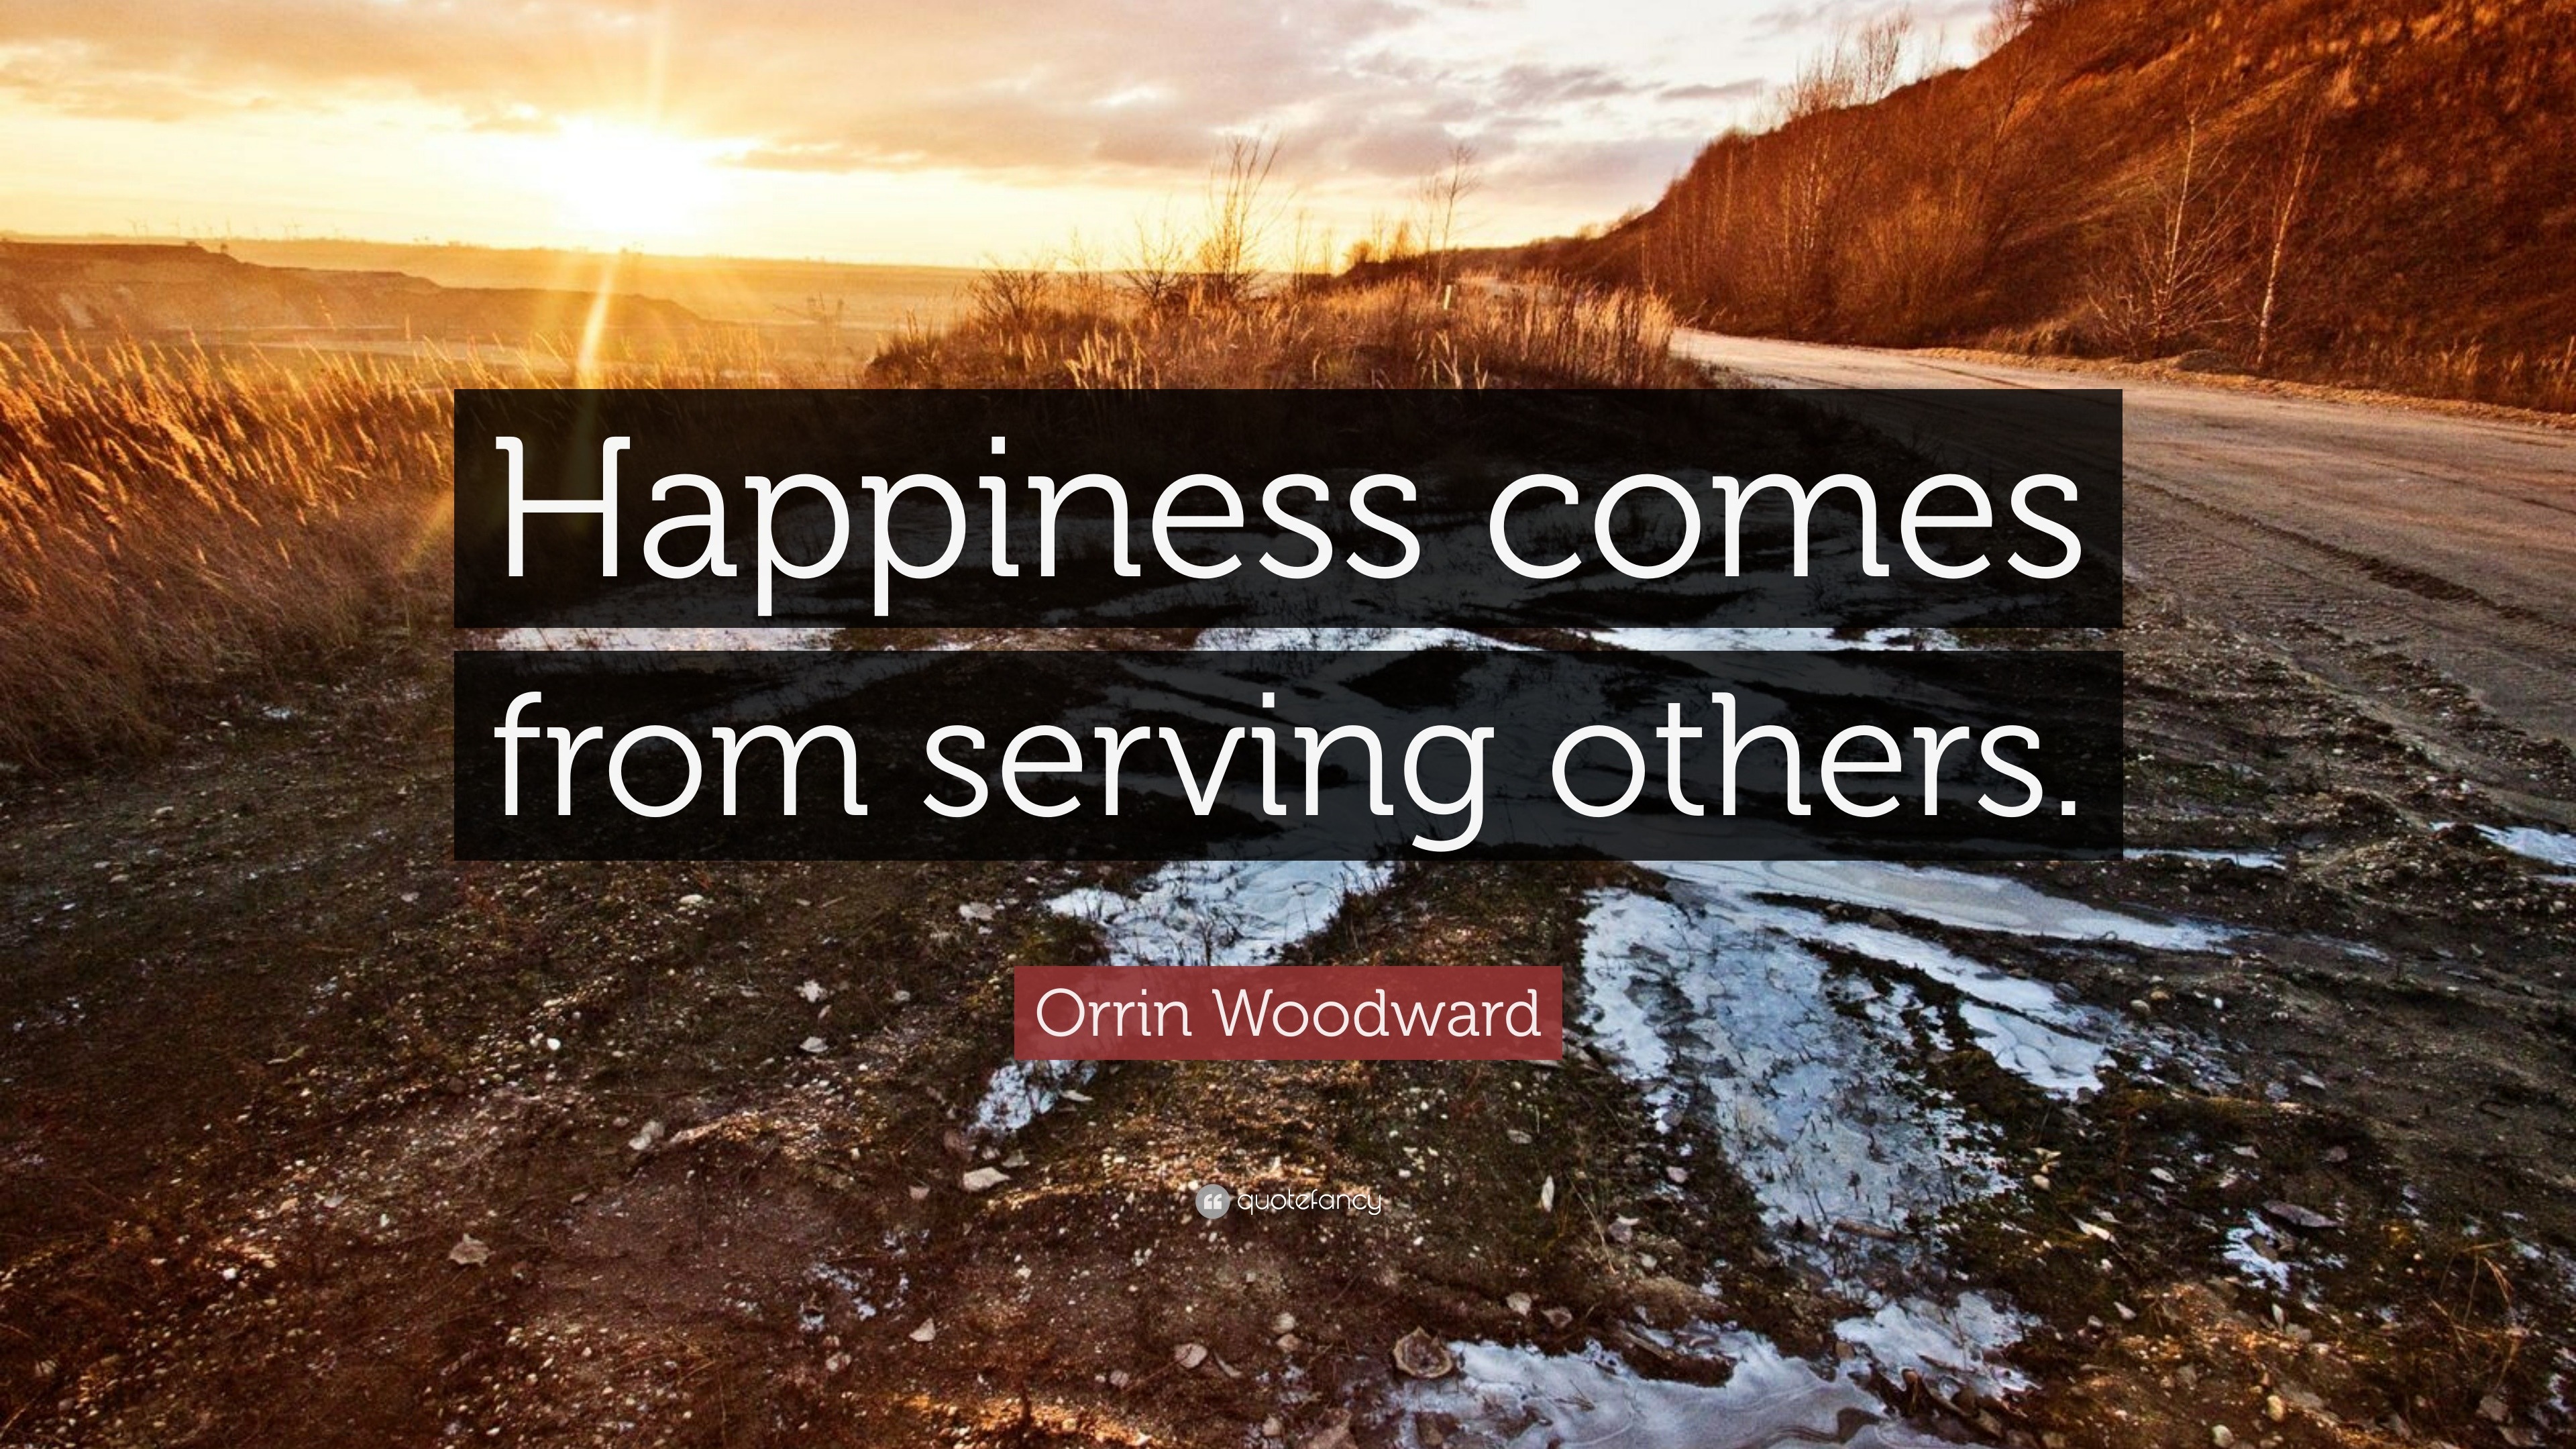 Orrin Woodward Quote “Happiness comes from serving others.”